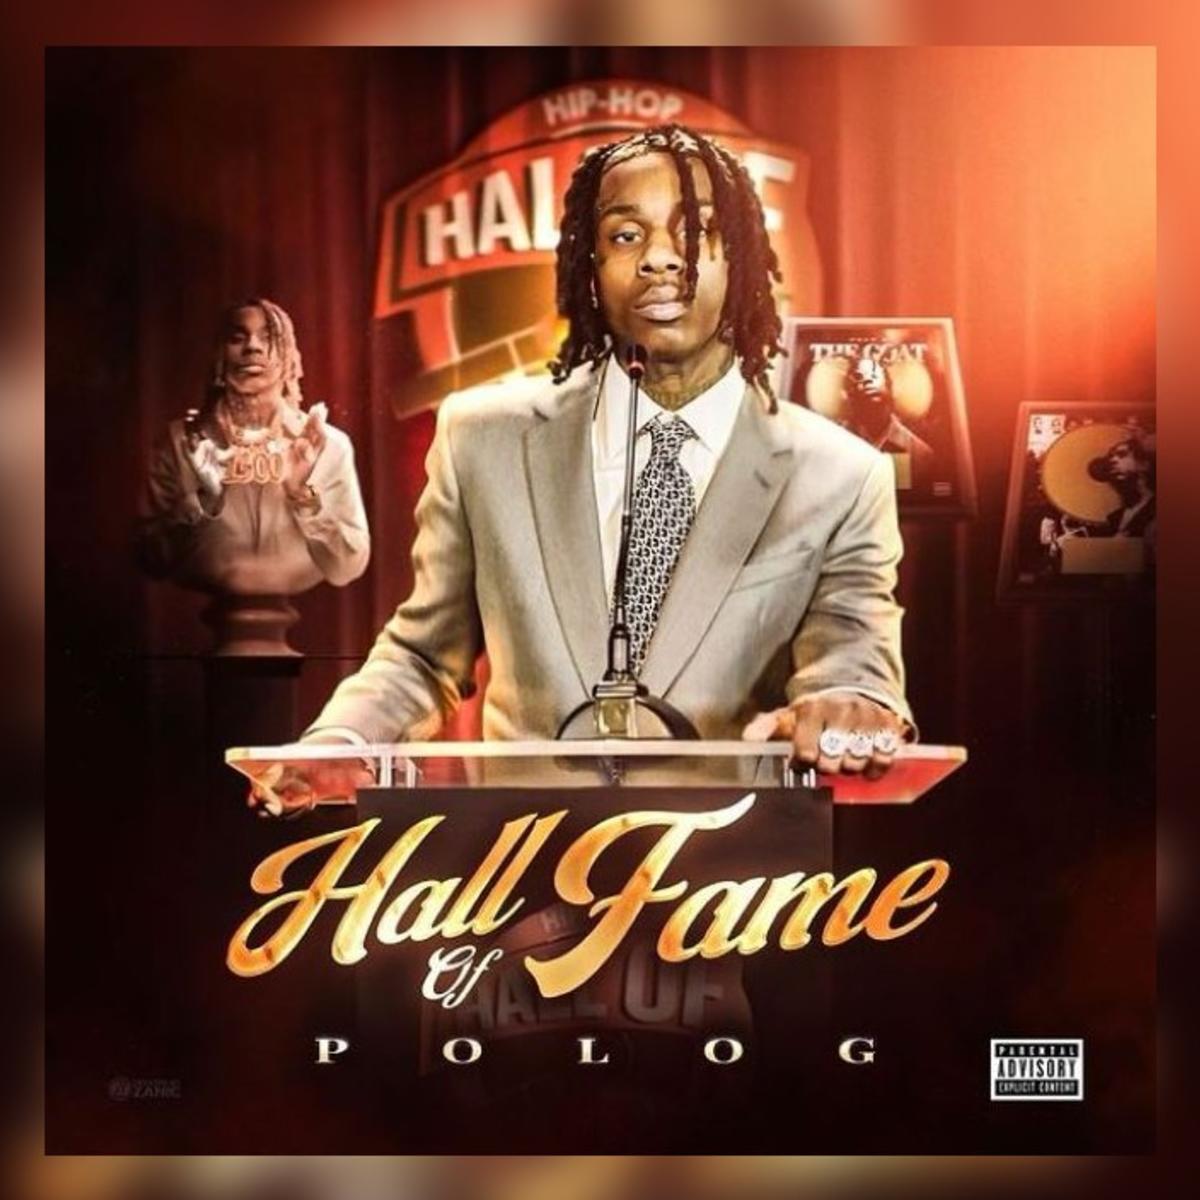 Polo G - Hall Of Fame (Album Review) | RATINGS GAME MUSIC